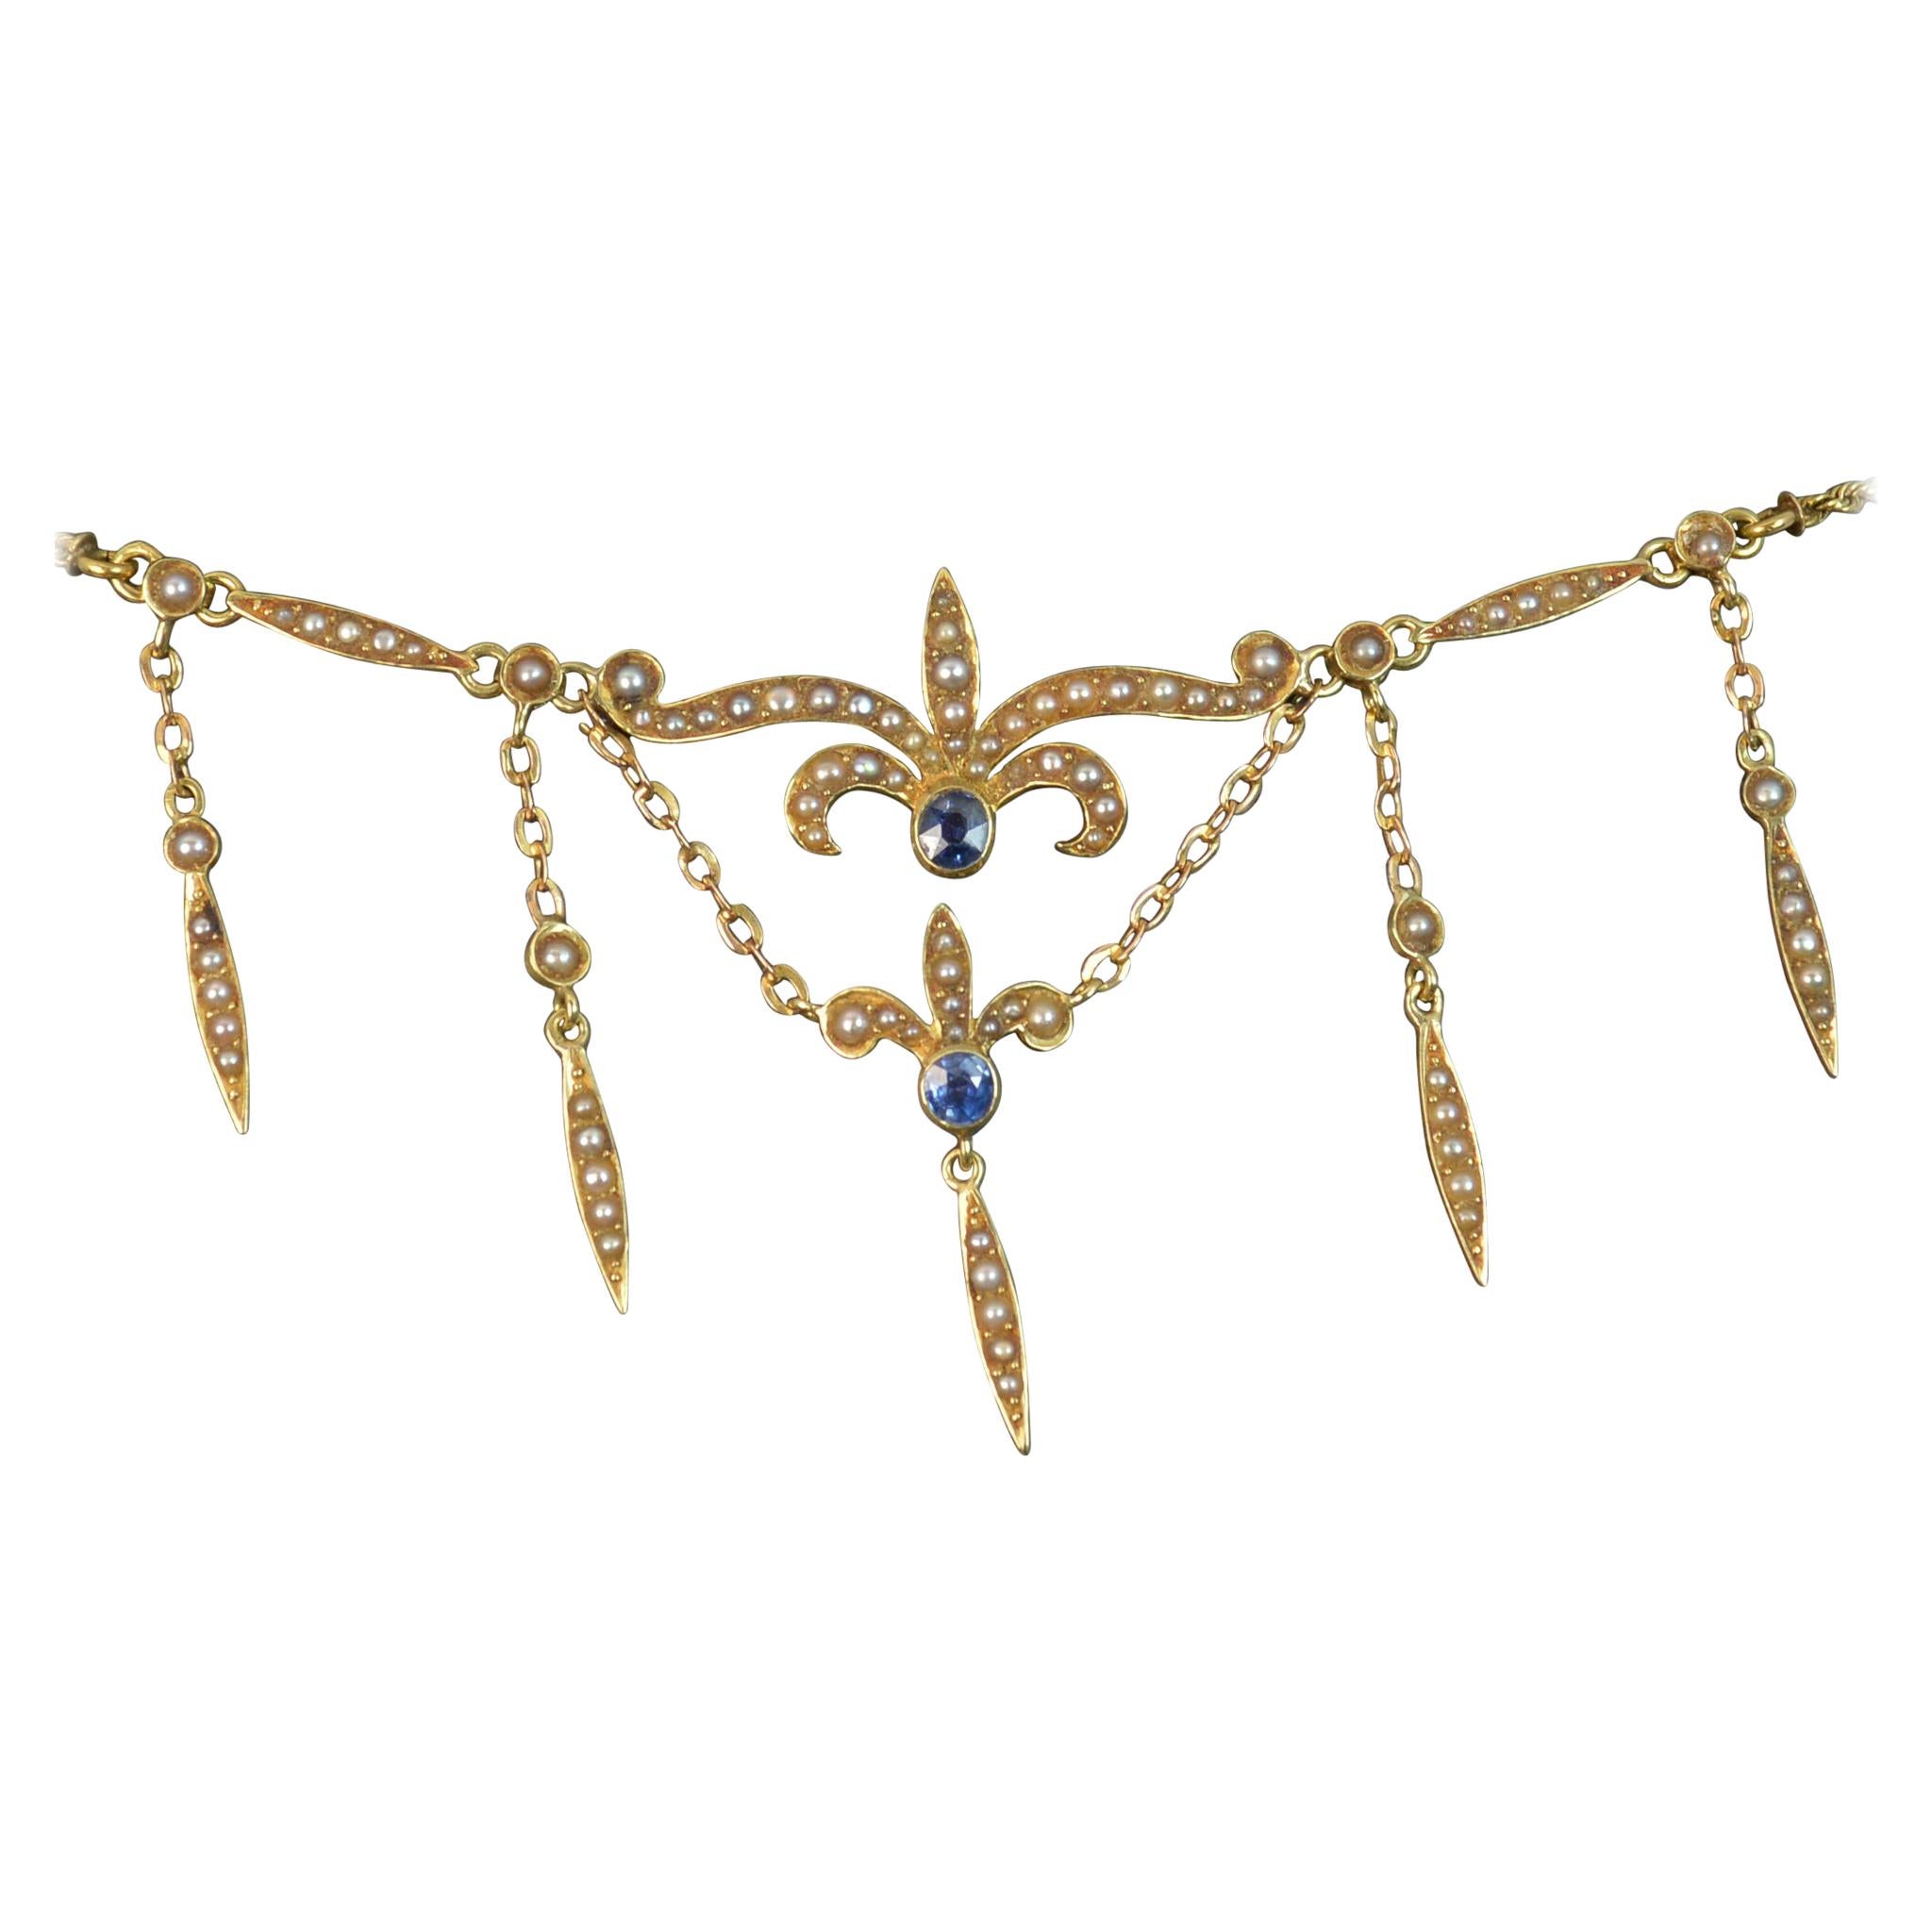 Art Nouveau 15 Carat Gold Sapphire and Seed Pearl Long Necklace Pendant